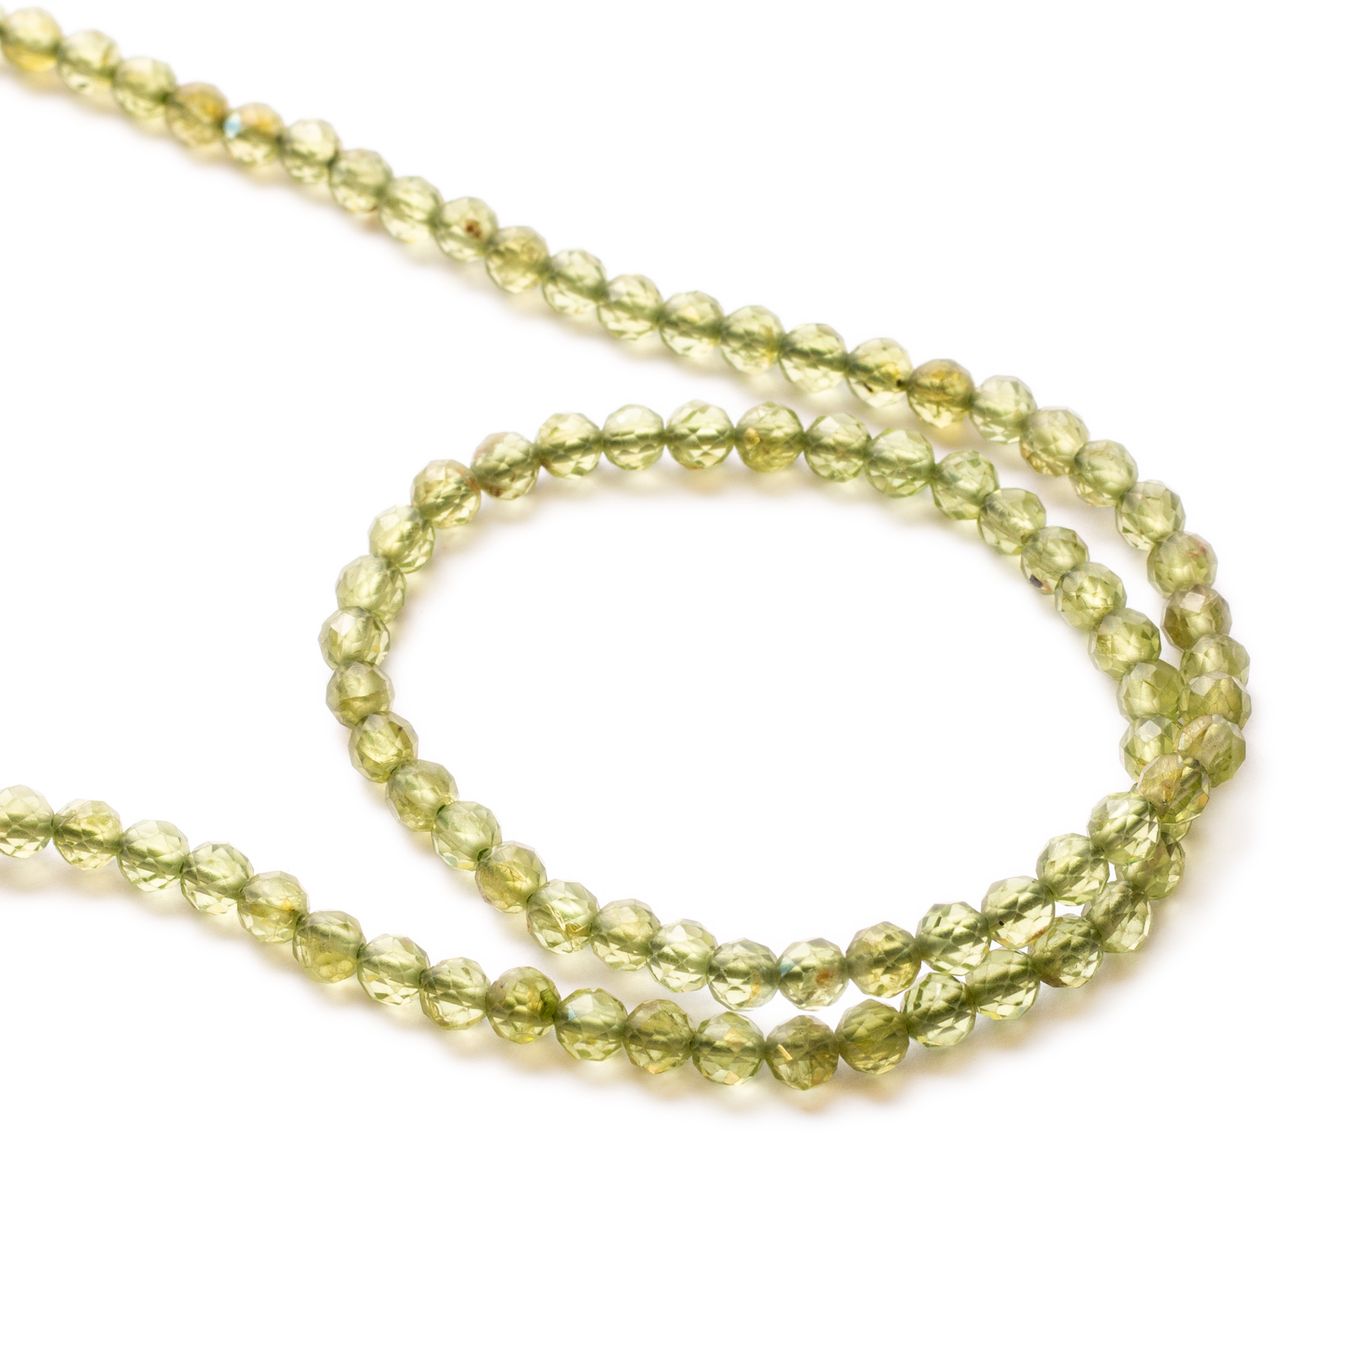 Peridot Facted Round Beads, Approx 3.5 